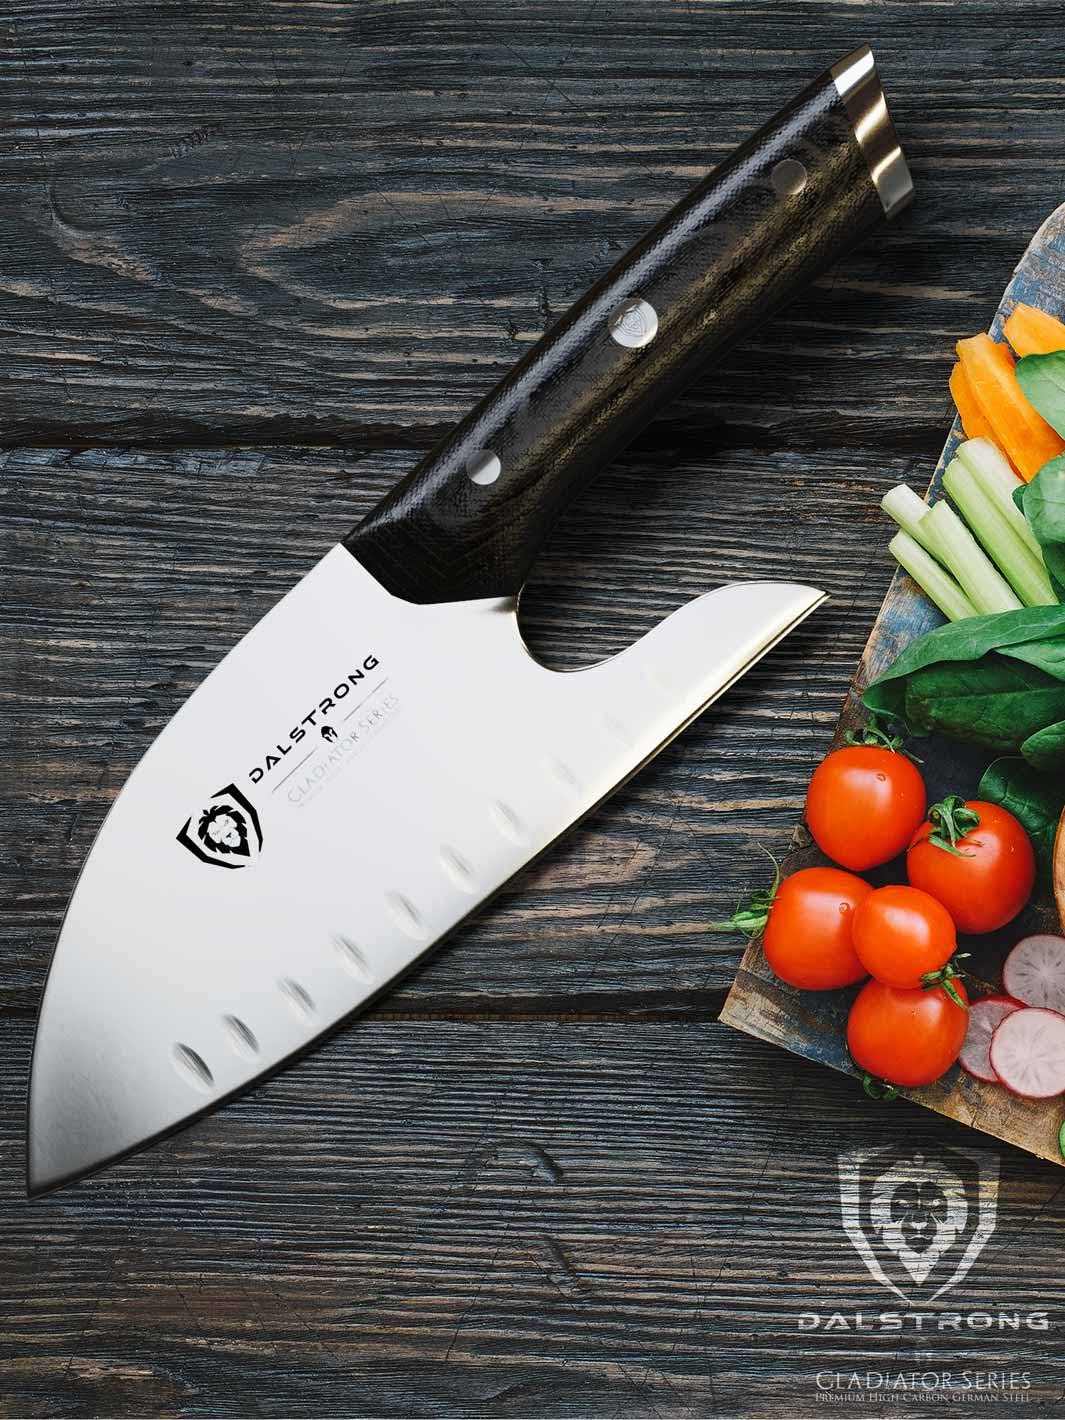 Dalstrong gladiator series 8 inch guardian chef knife with black handle and vegetables on a wooden cutting board.